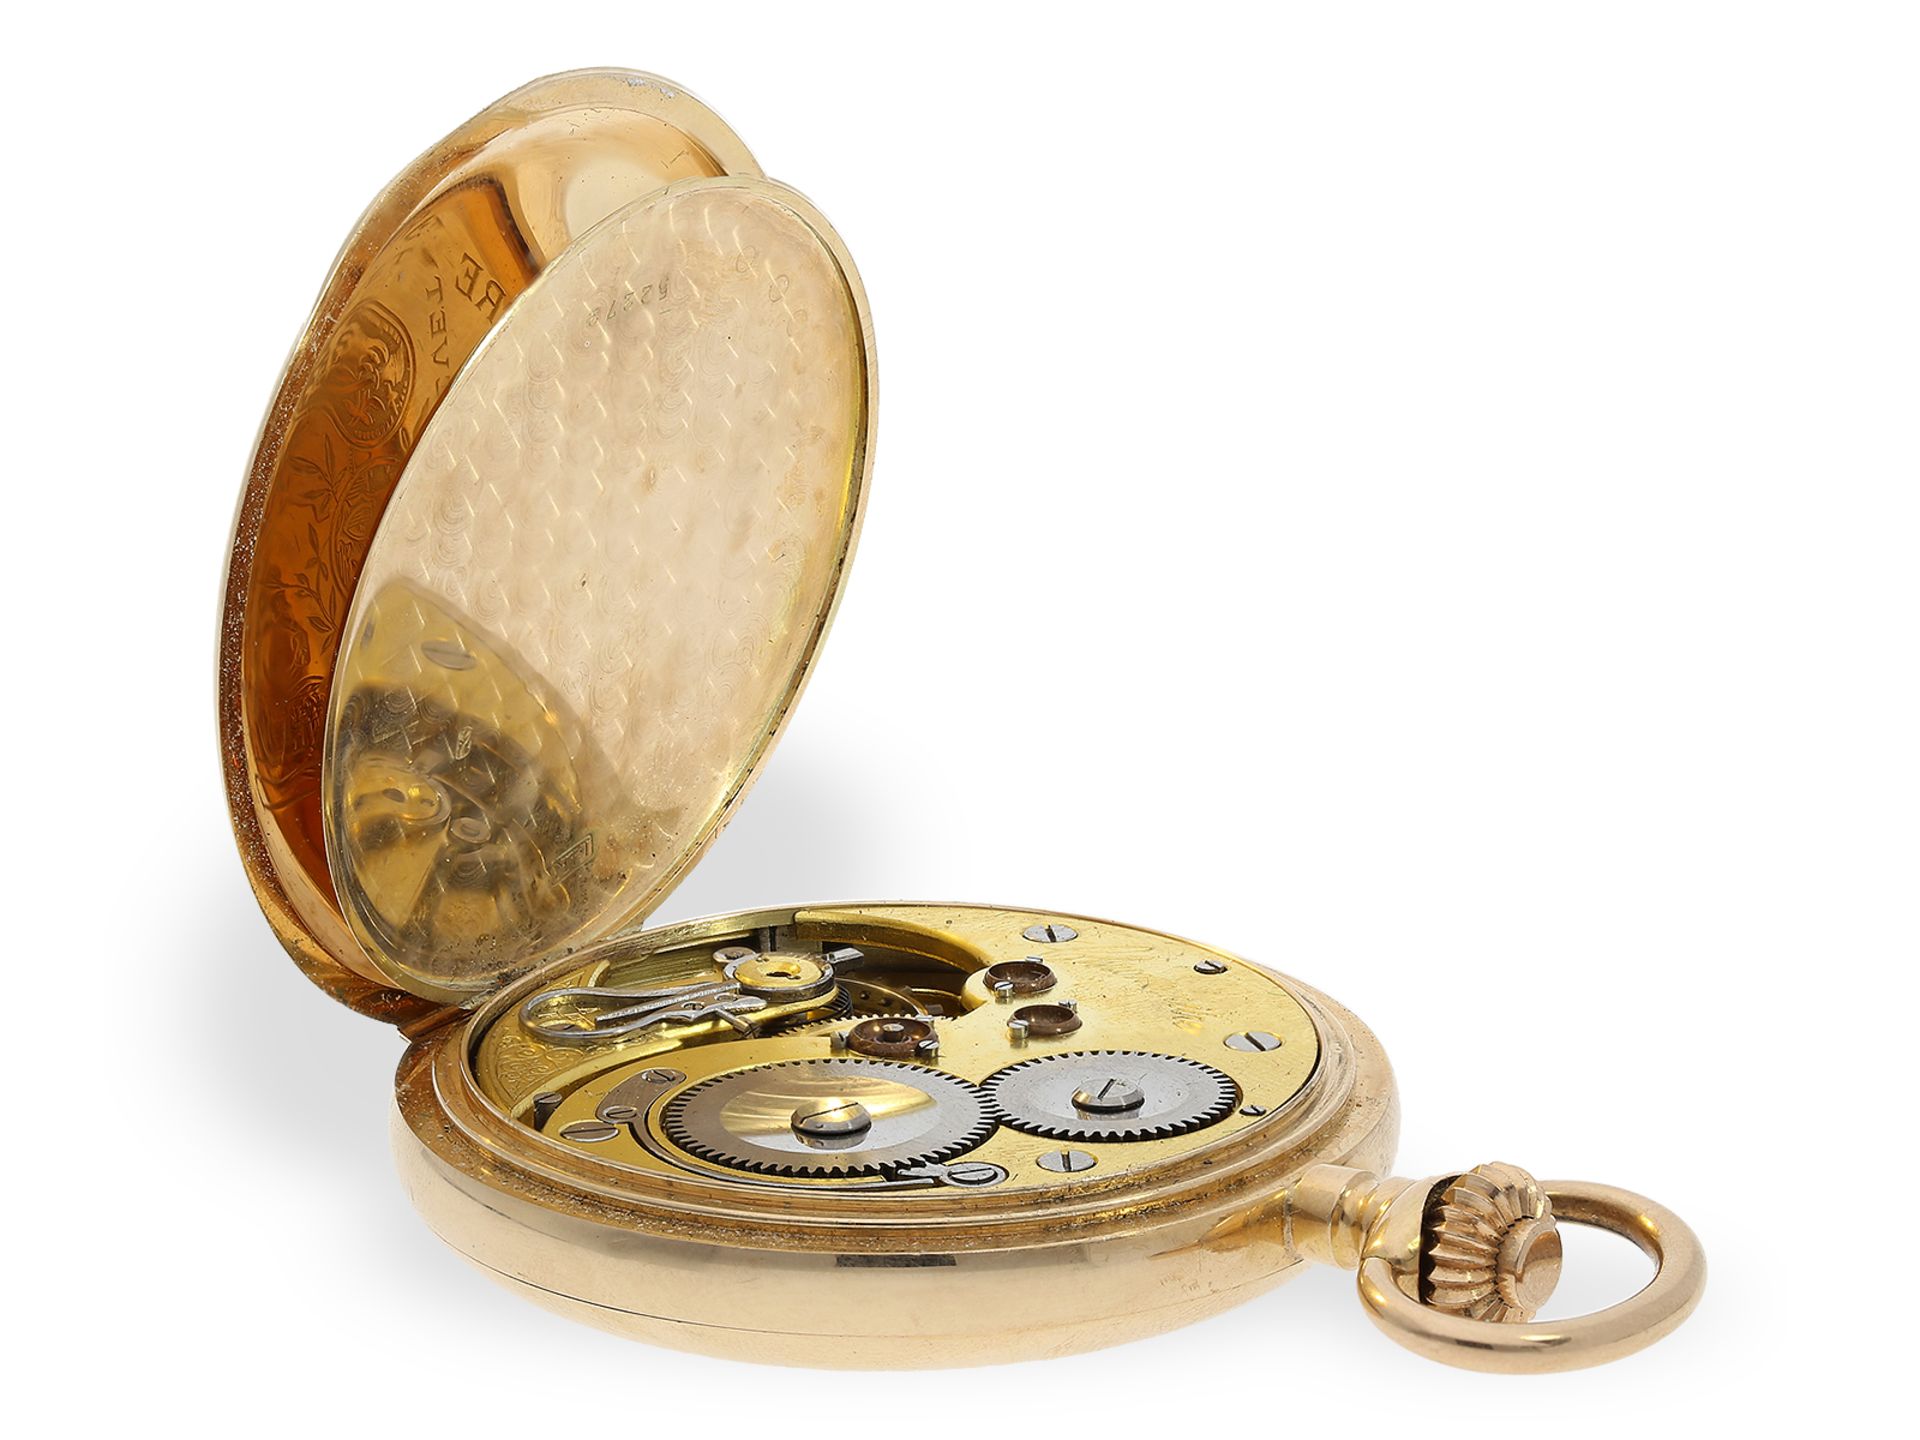 Very fine gold hunting case watch with chronometer escapement, "Chronometre Geneve", ca. 1900 - Image 4 of 8